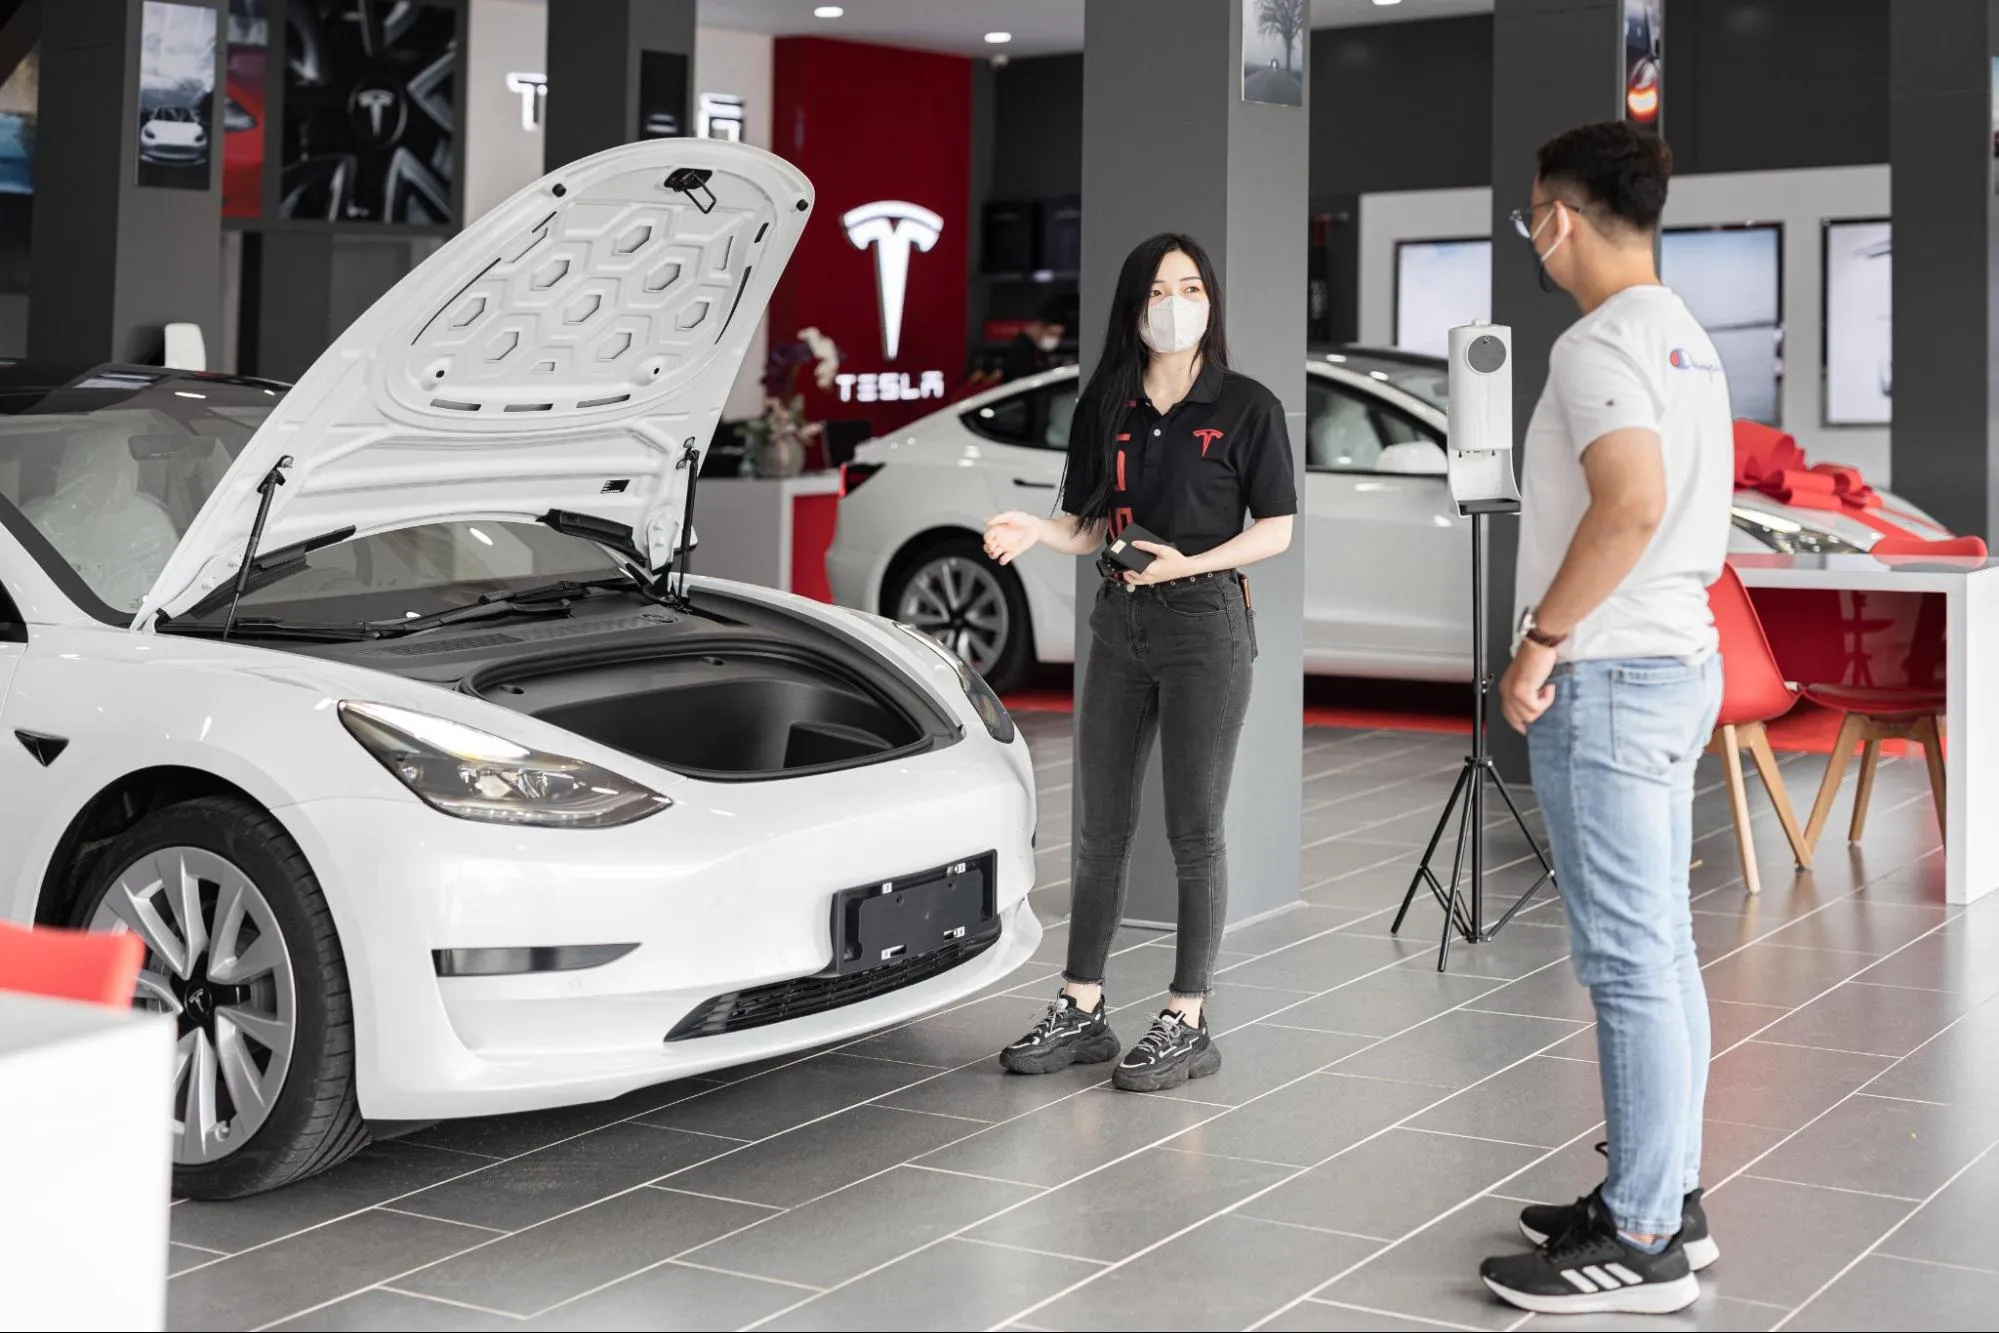 Why Was Tesla's Marketing Strategy Successful?